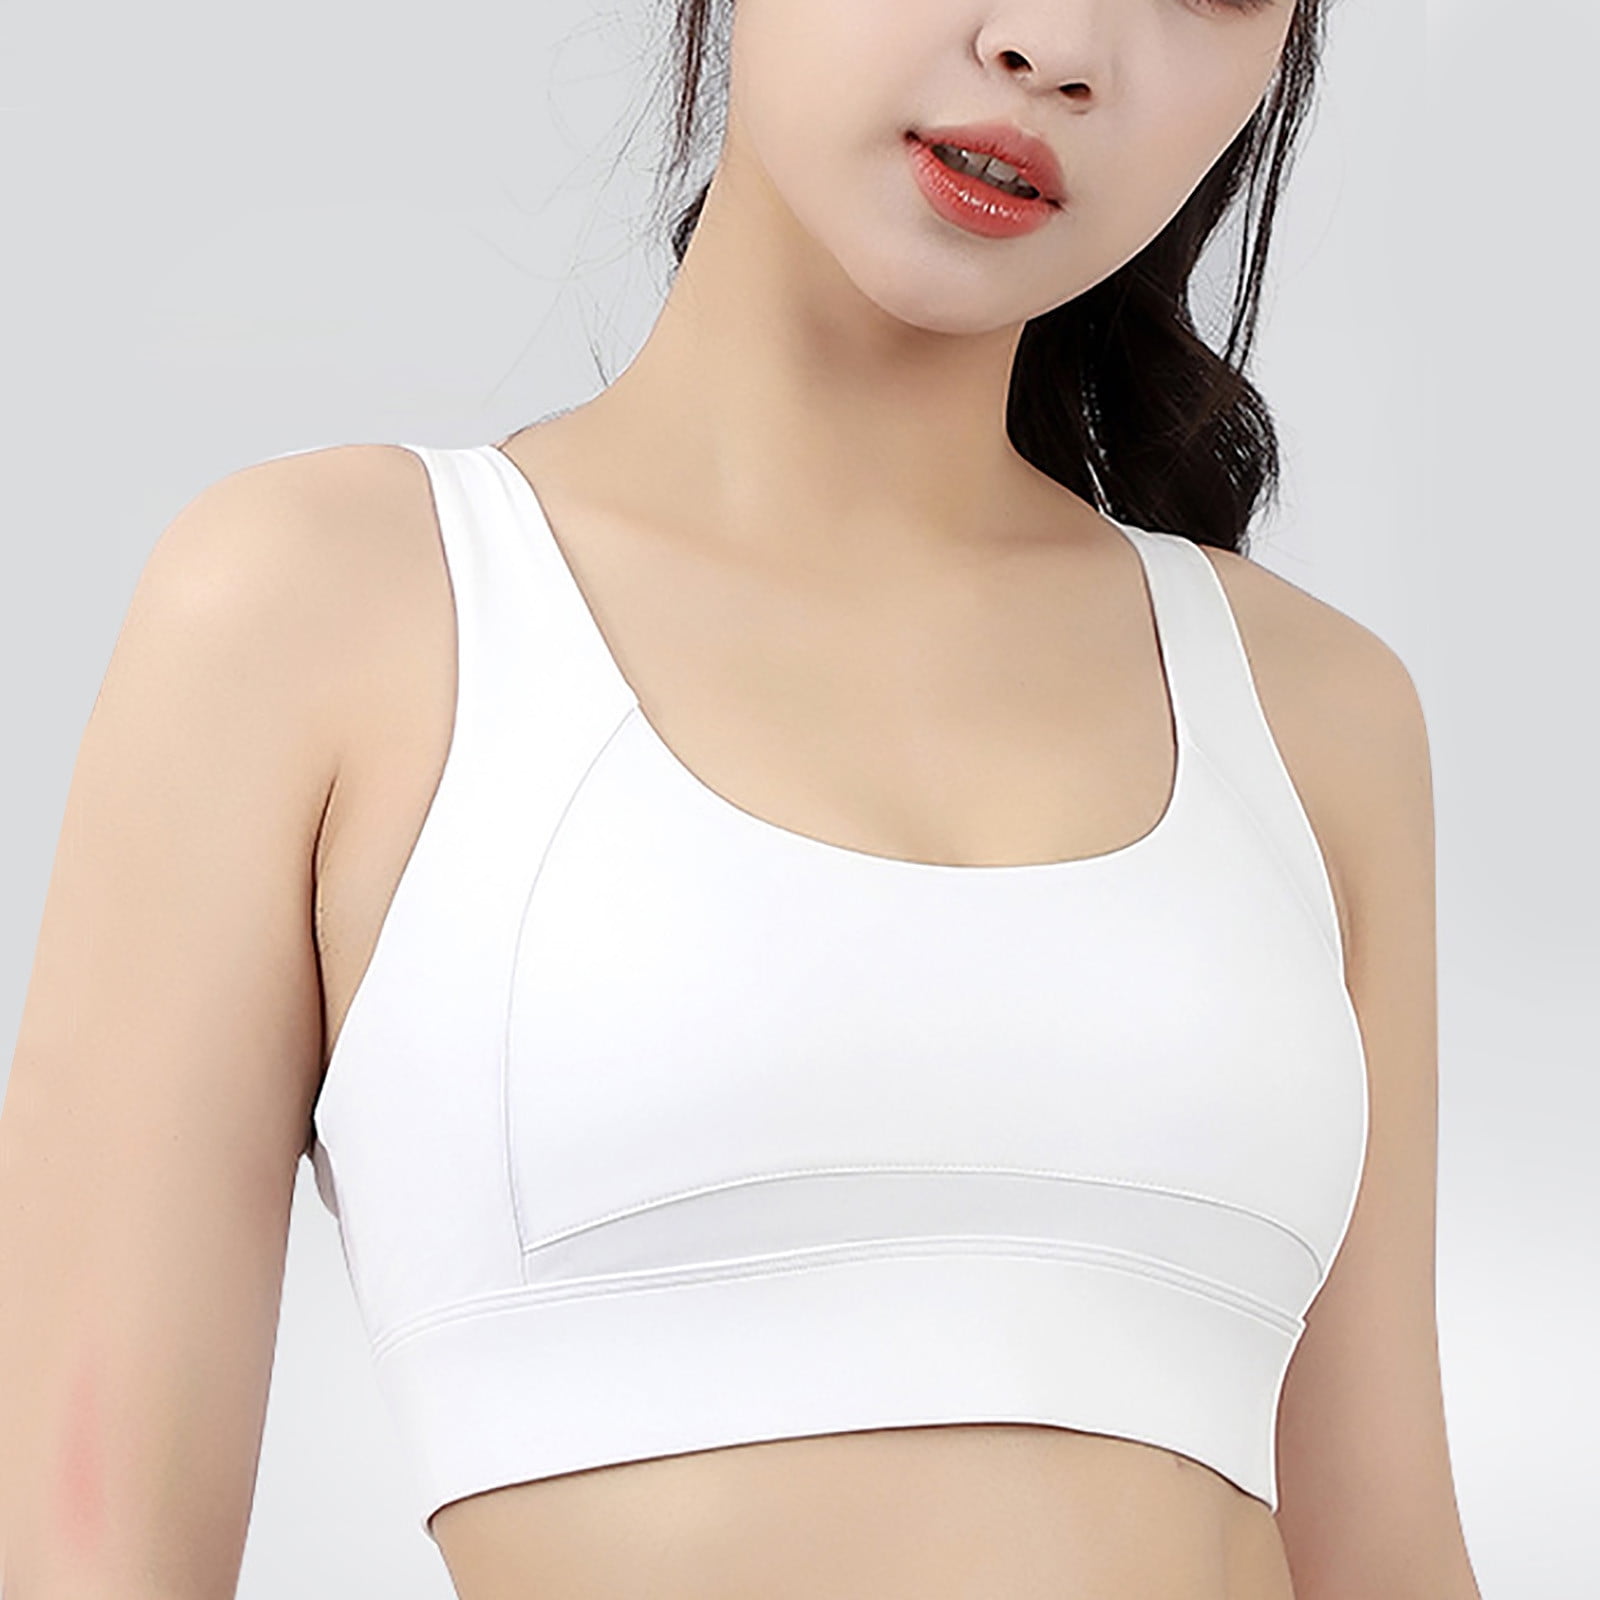 Sexywg Breathable Sport Bras Yoga Shirts Vest Women Sexy White